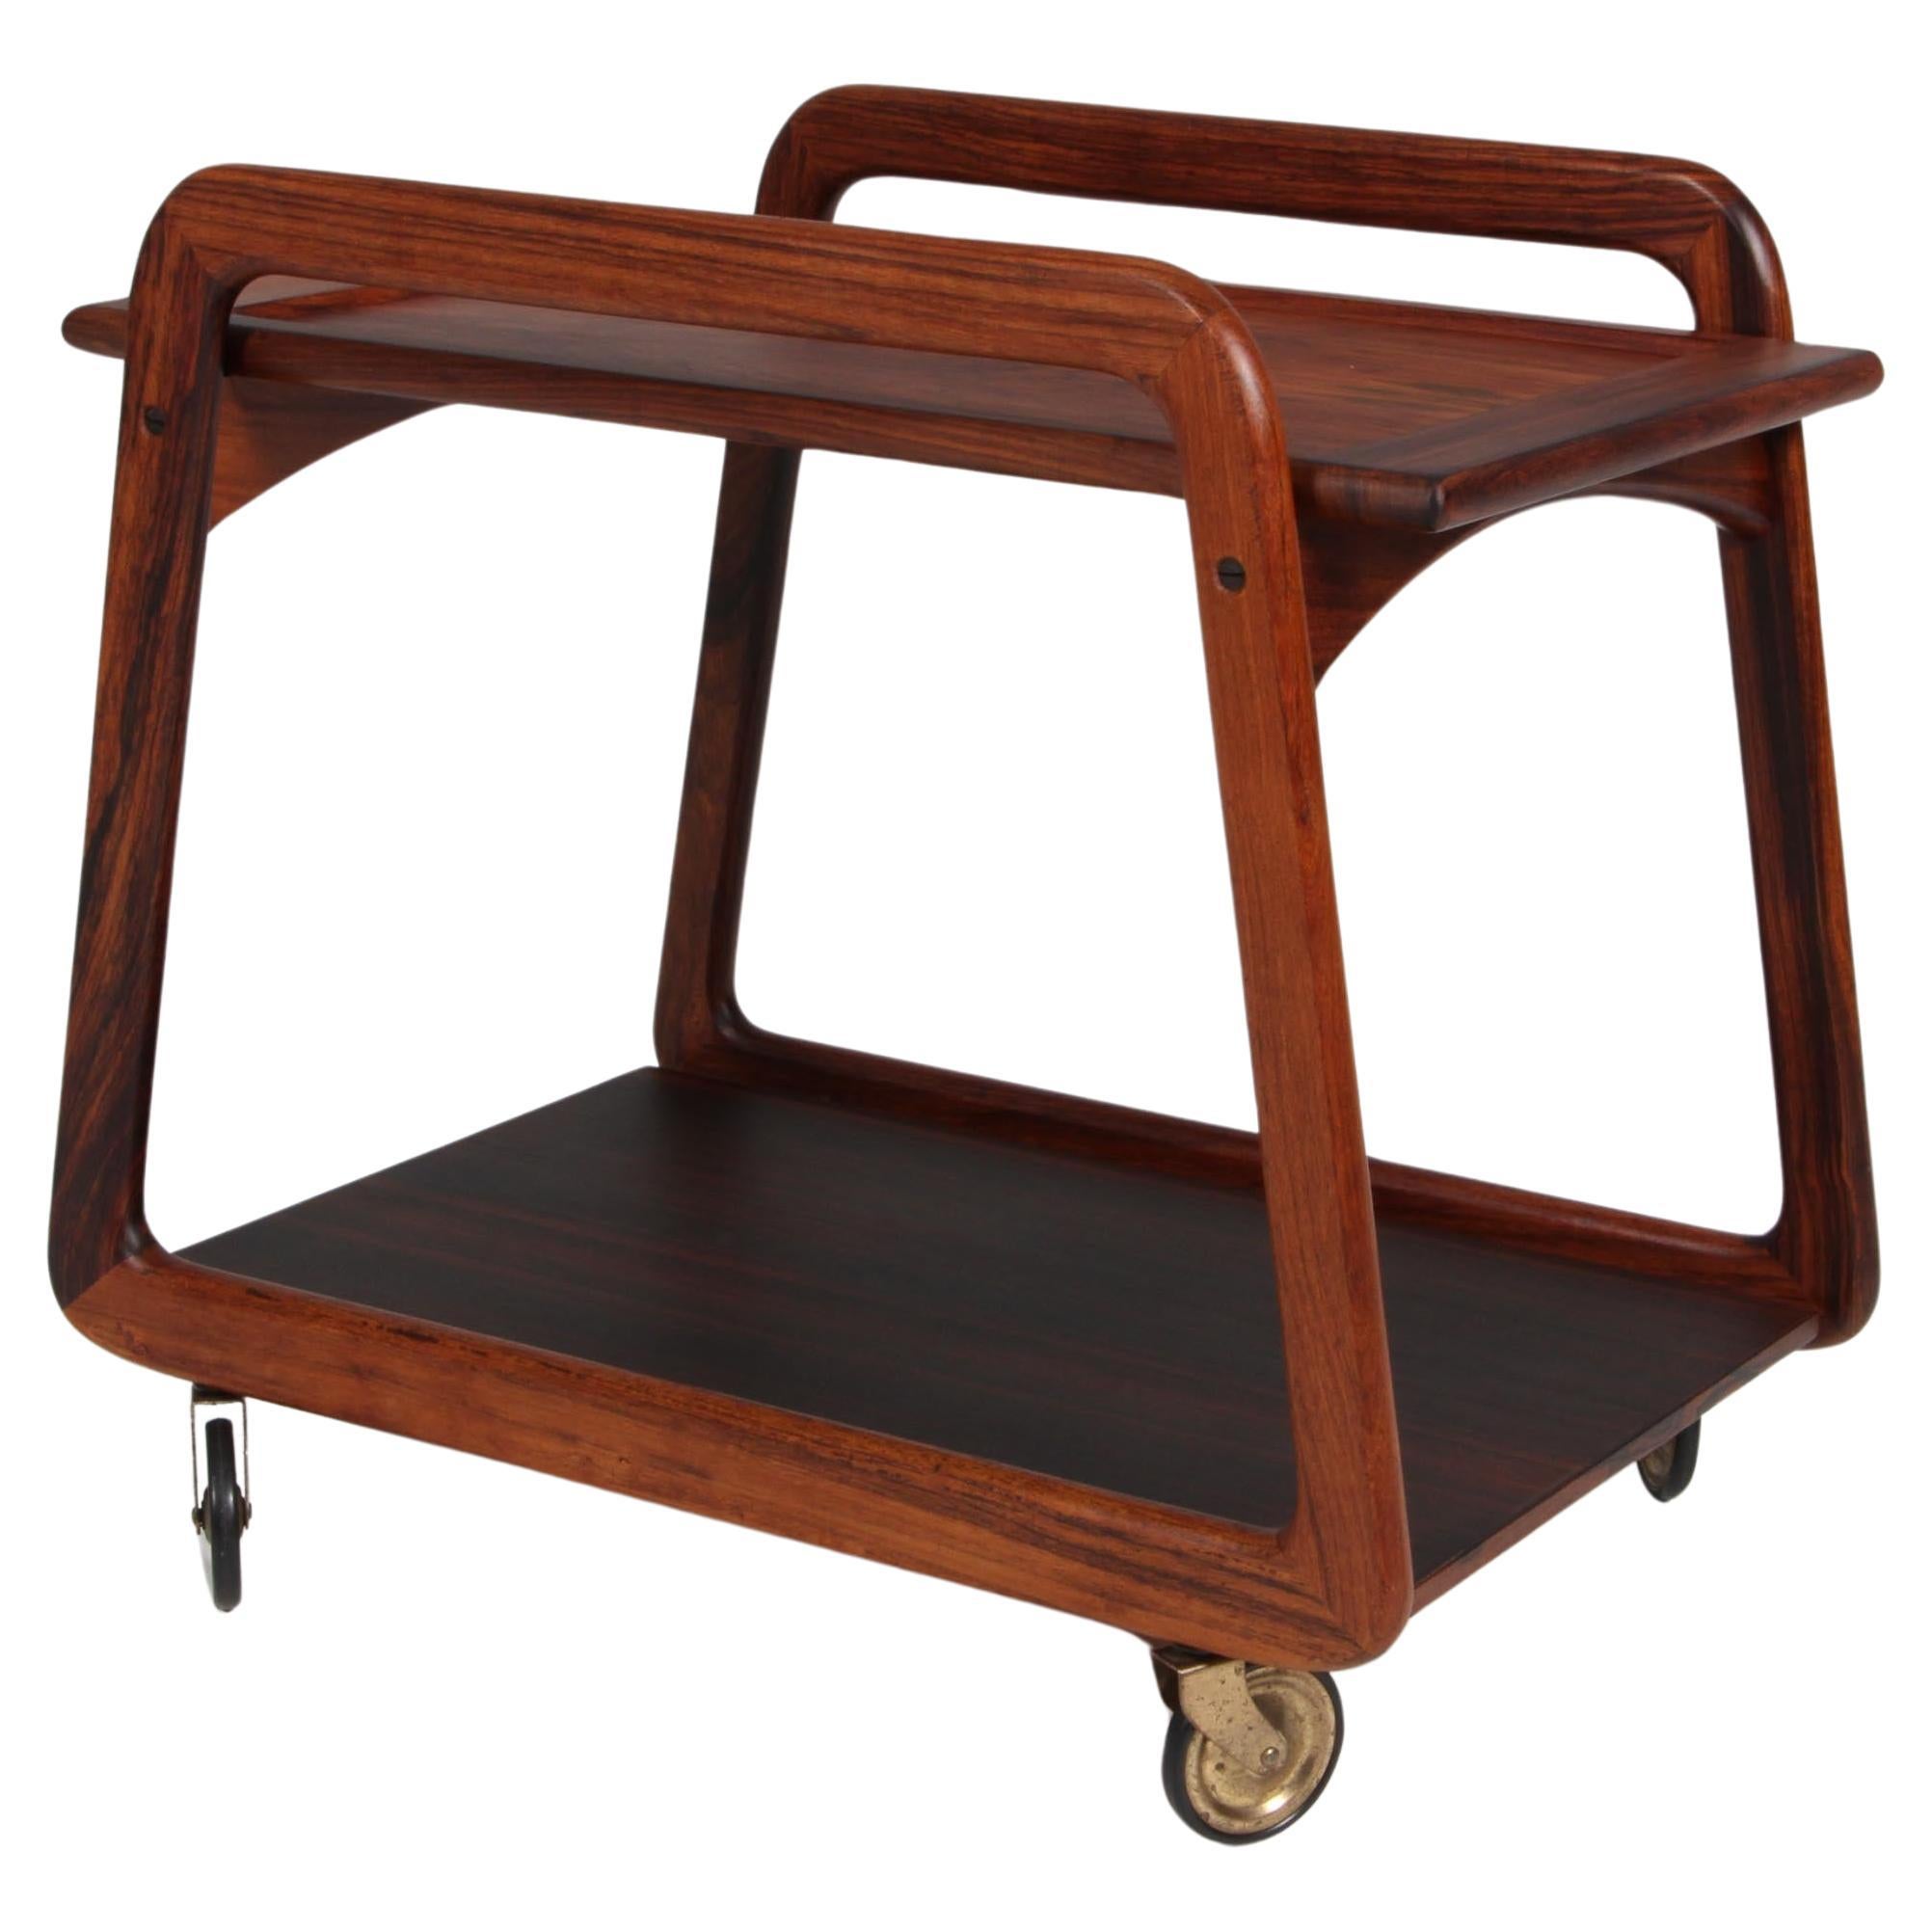 Sika Møbler, bar cart in rosewood and formica